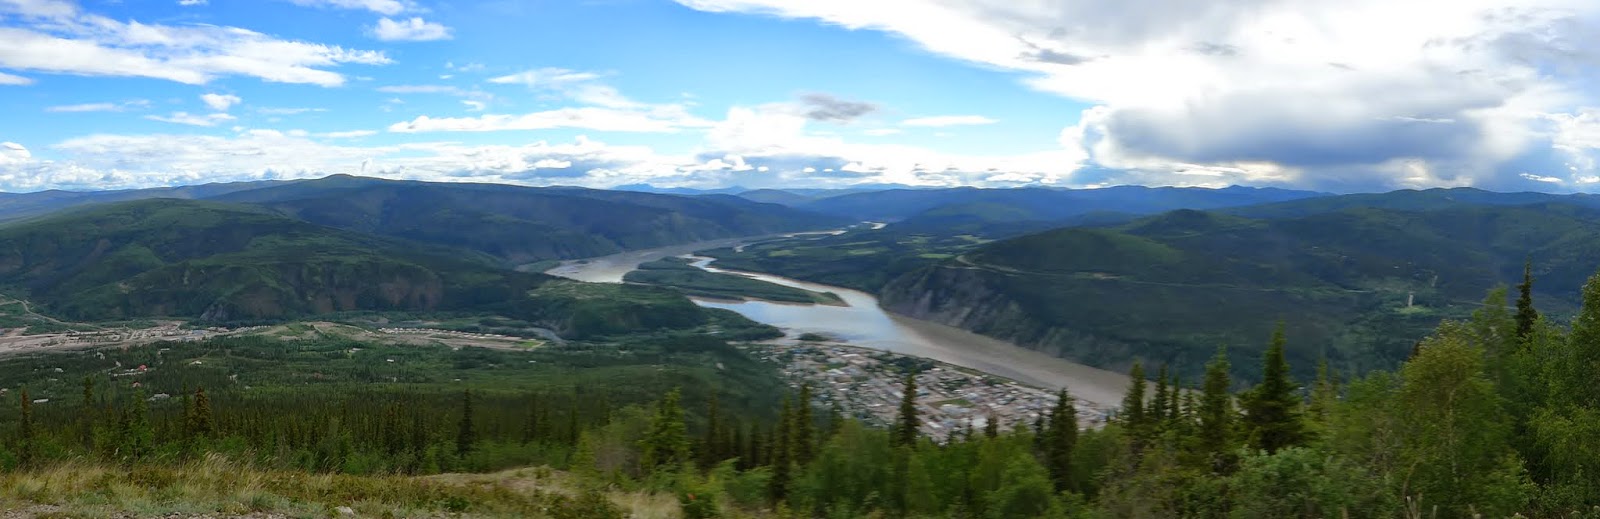 View of Dawson City and the Yukon River.